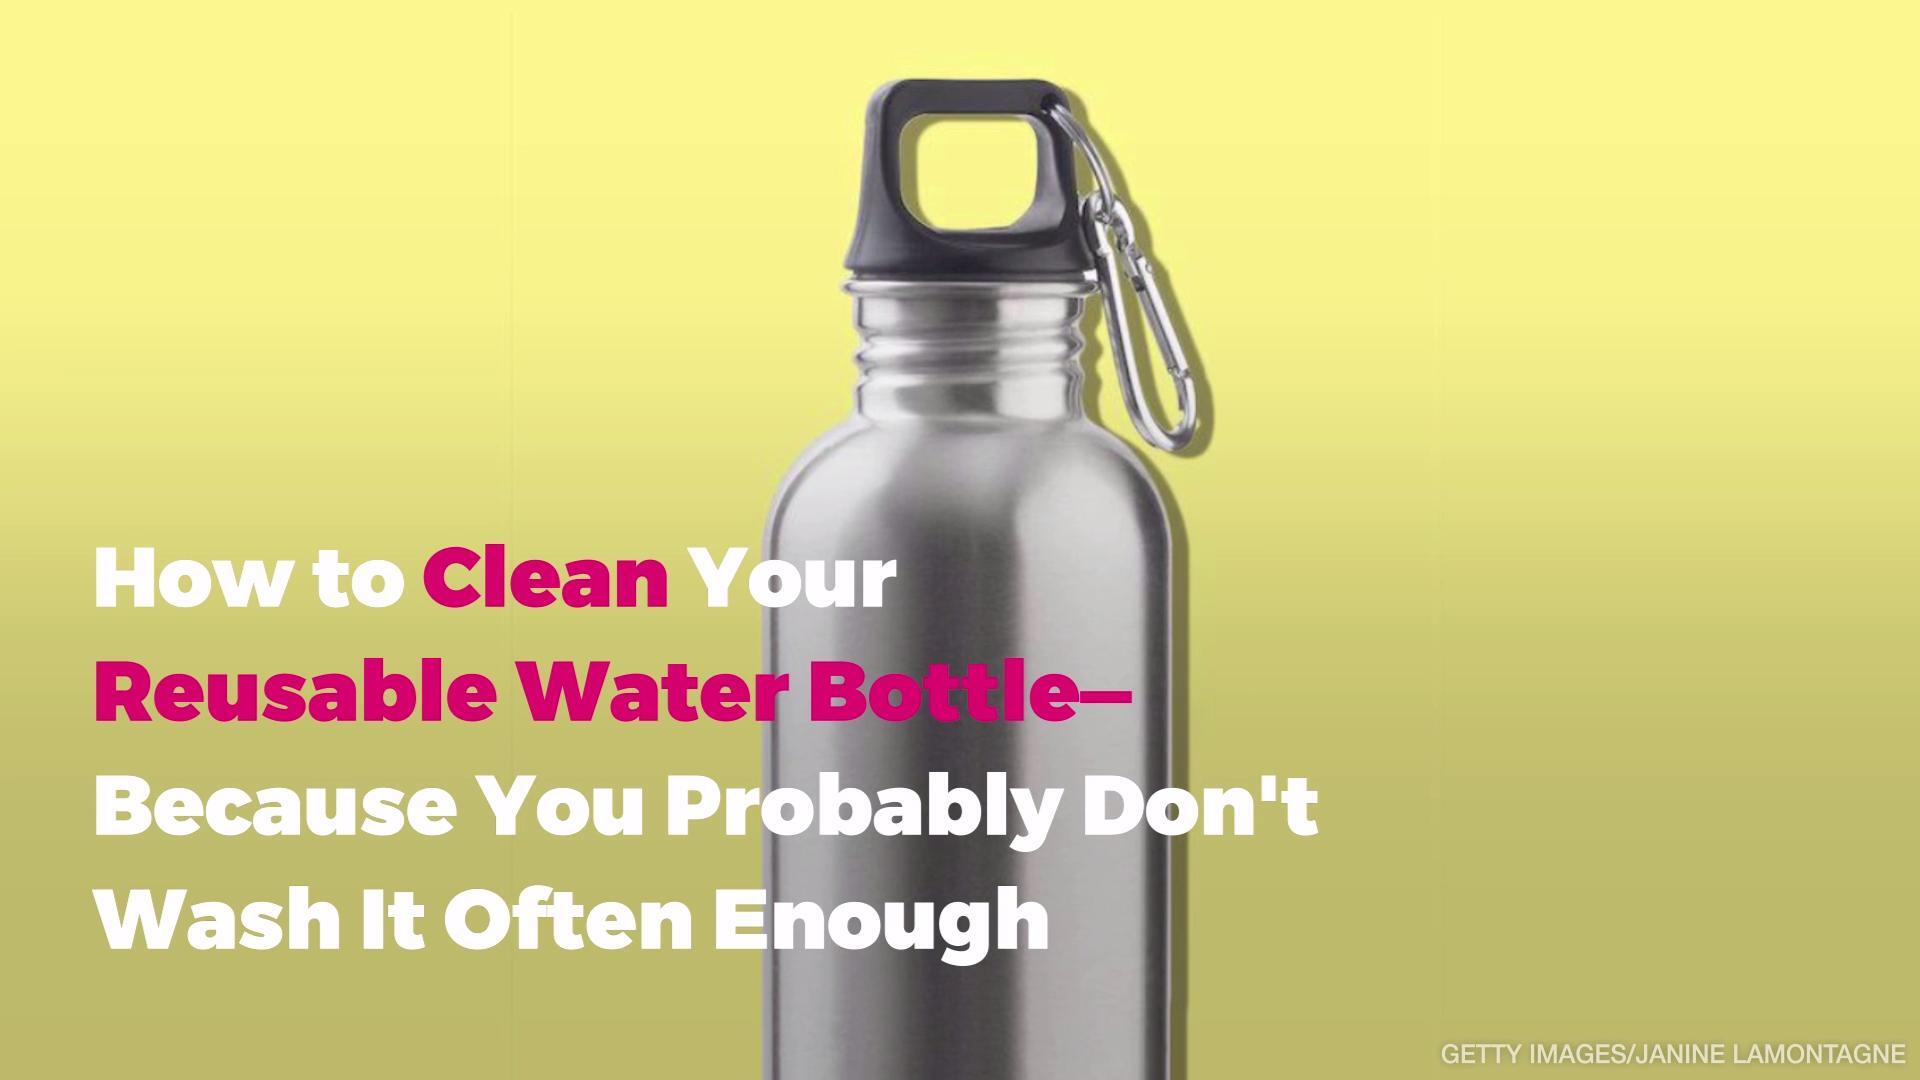 How to Properly Clean a Water Bottle